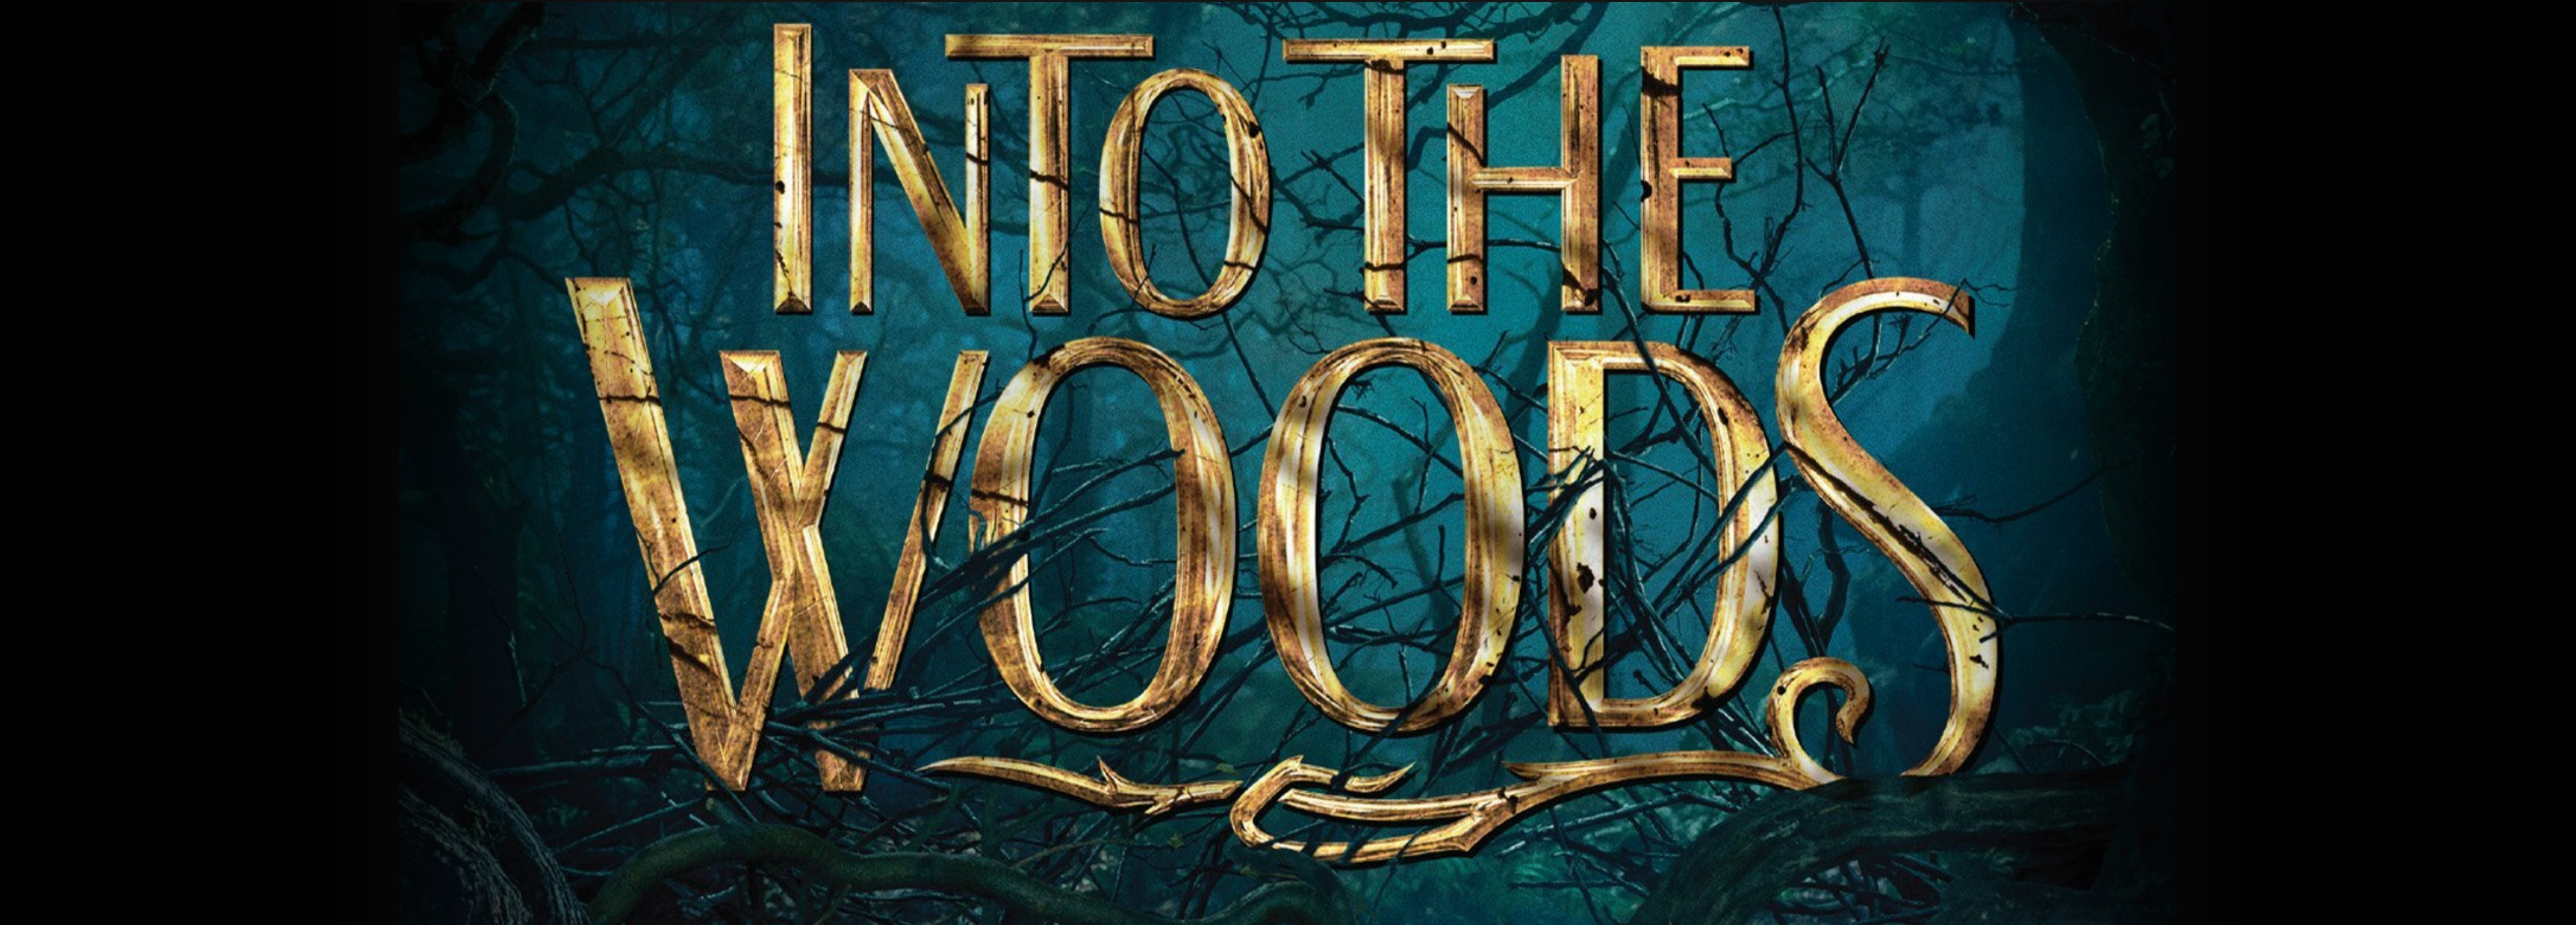 Into The Woods Oxford Performing Arts Center